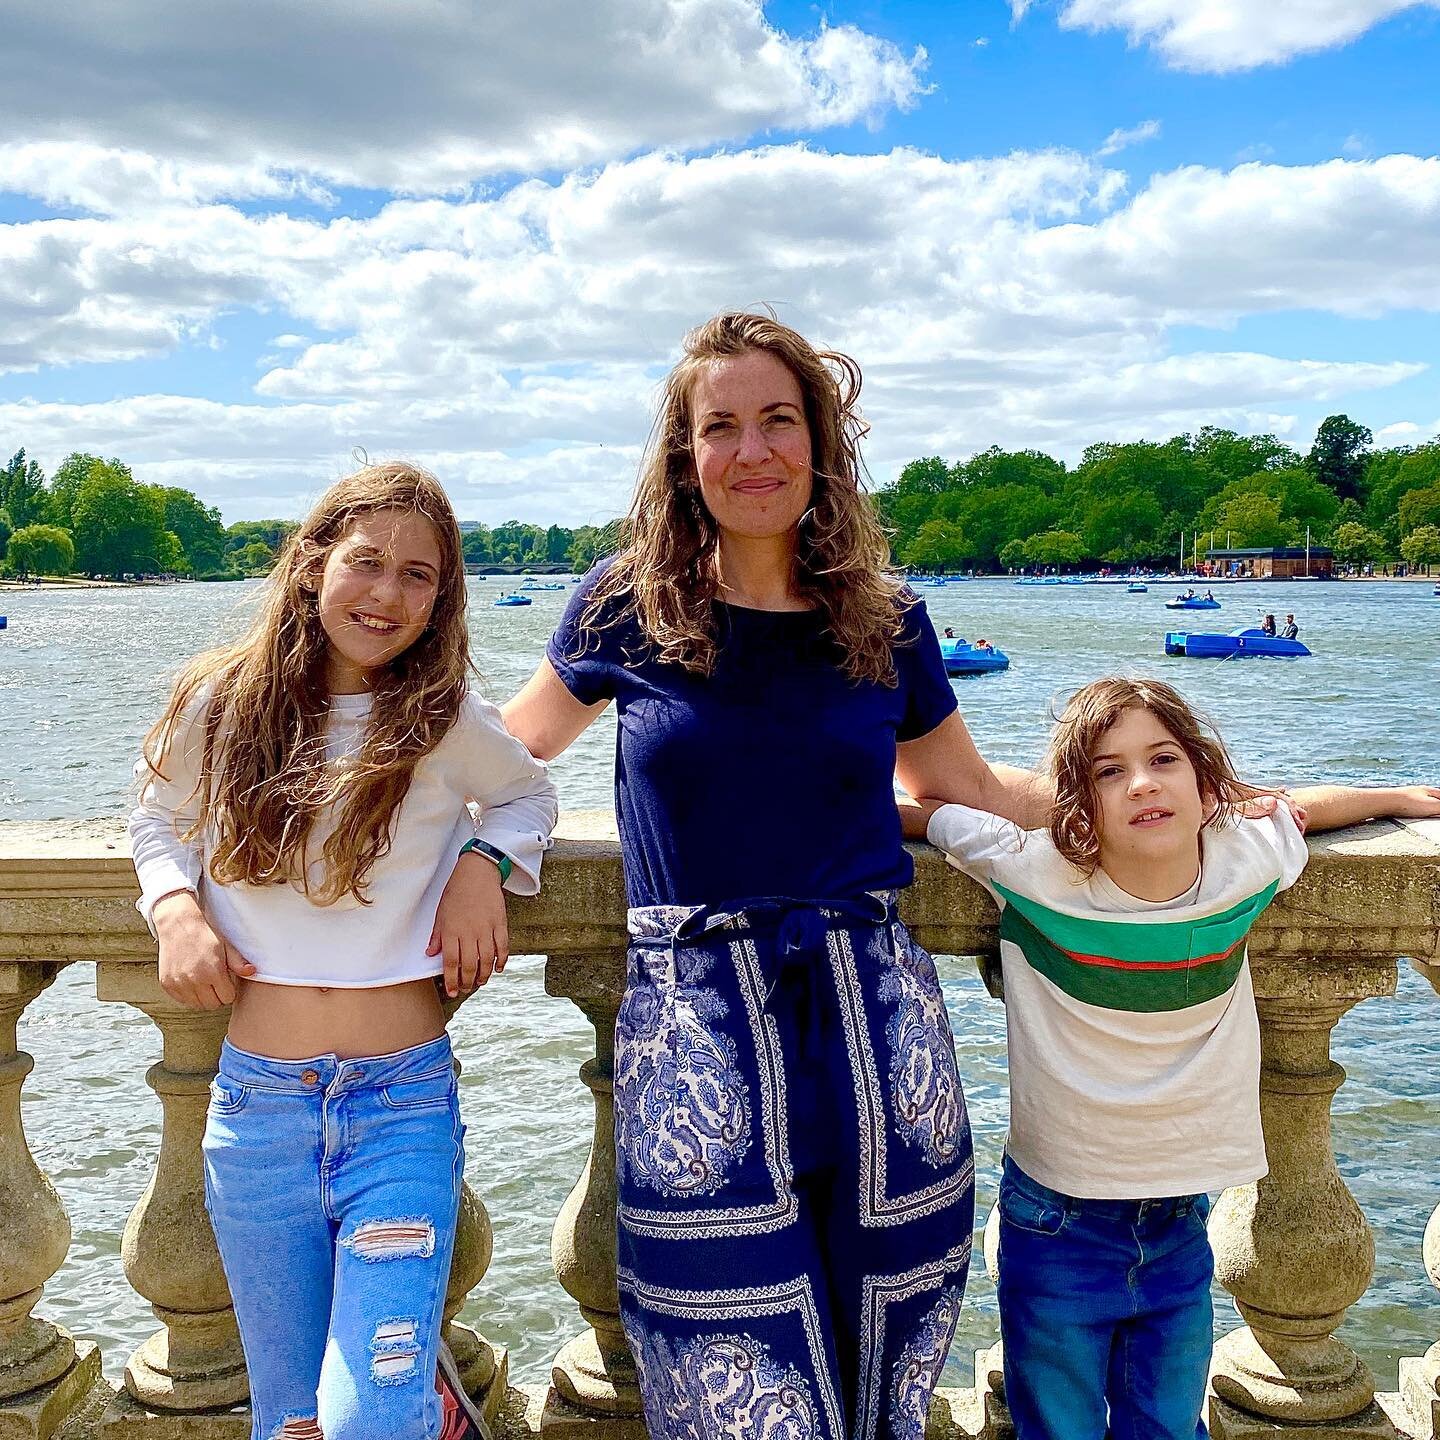 As London reopens, a rare day out! 
#london #londonreopening #hydepark #londonwithkids #serpentine #interiordesigner #ilfalconelondon